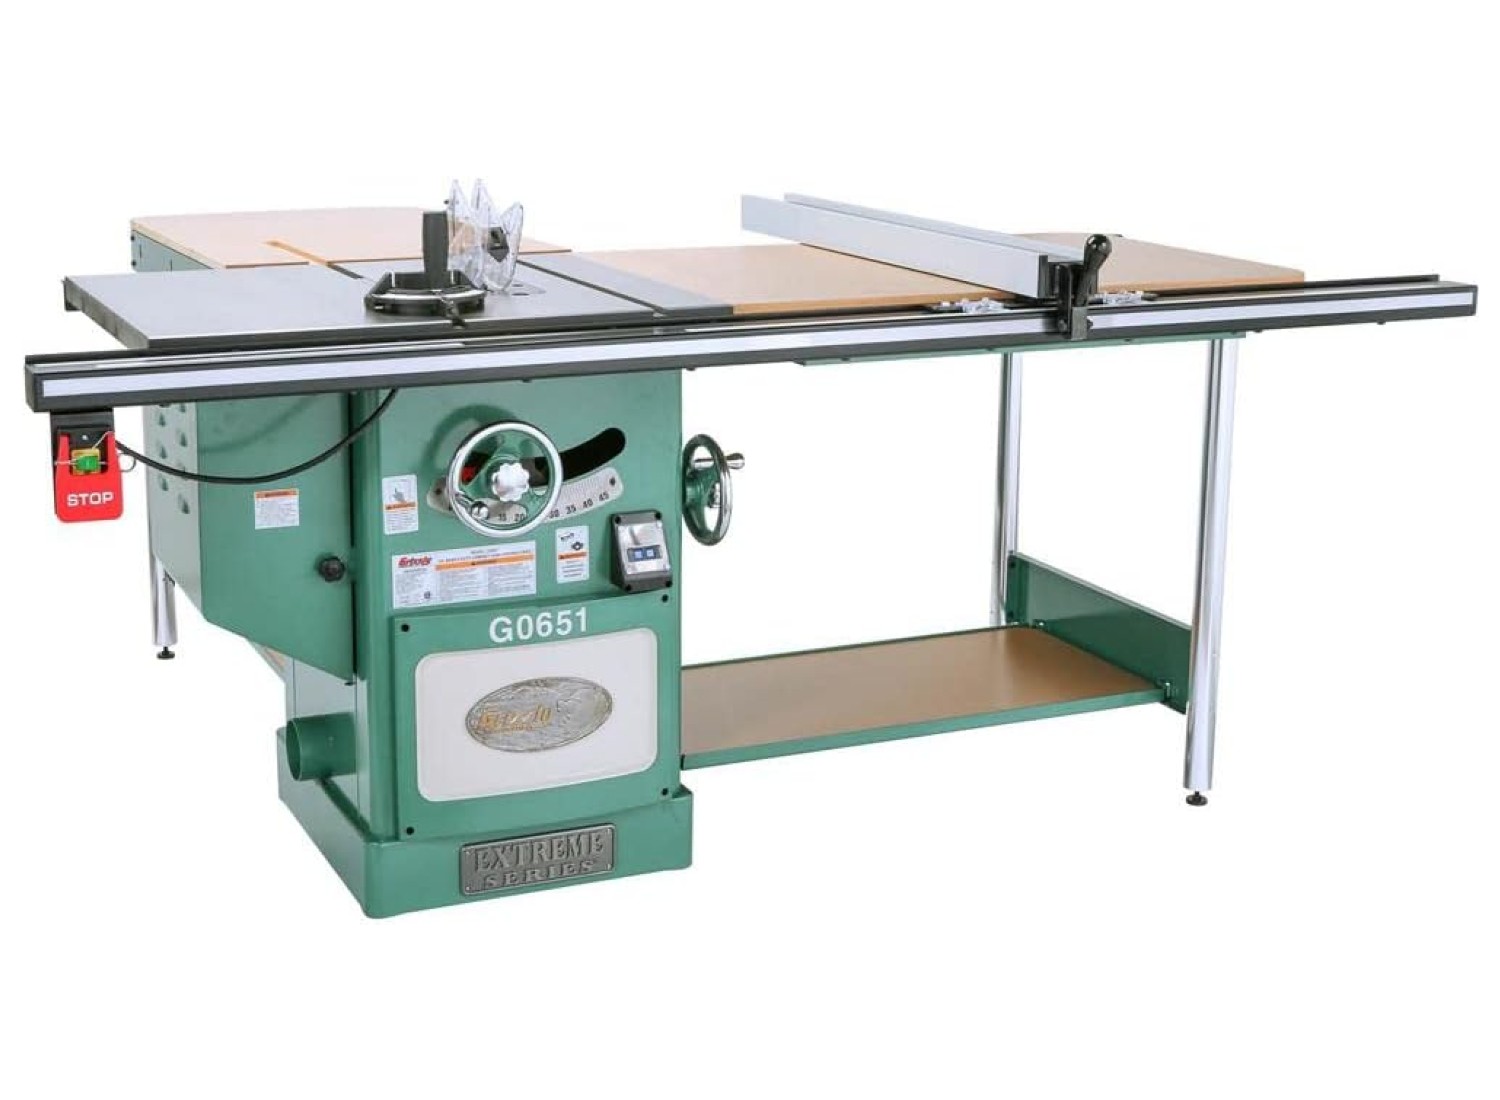 Green Grizzly Industrial cabinet table saw with wooden cutting surfaces.